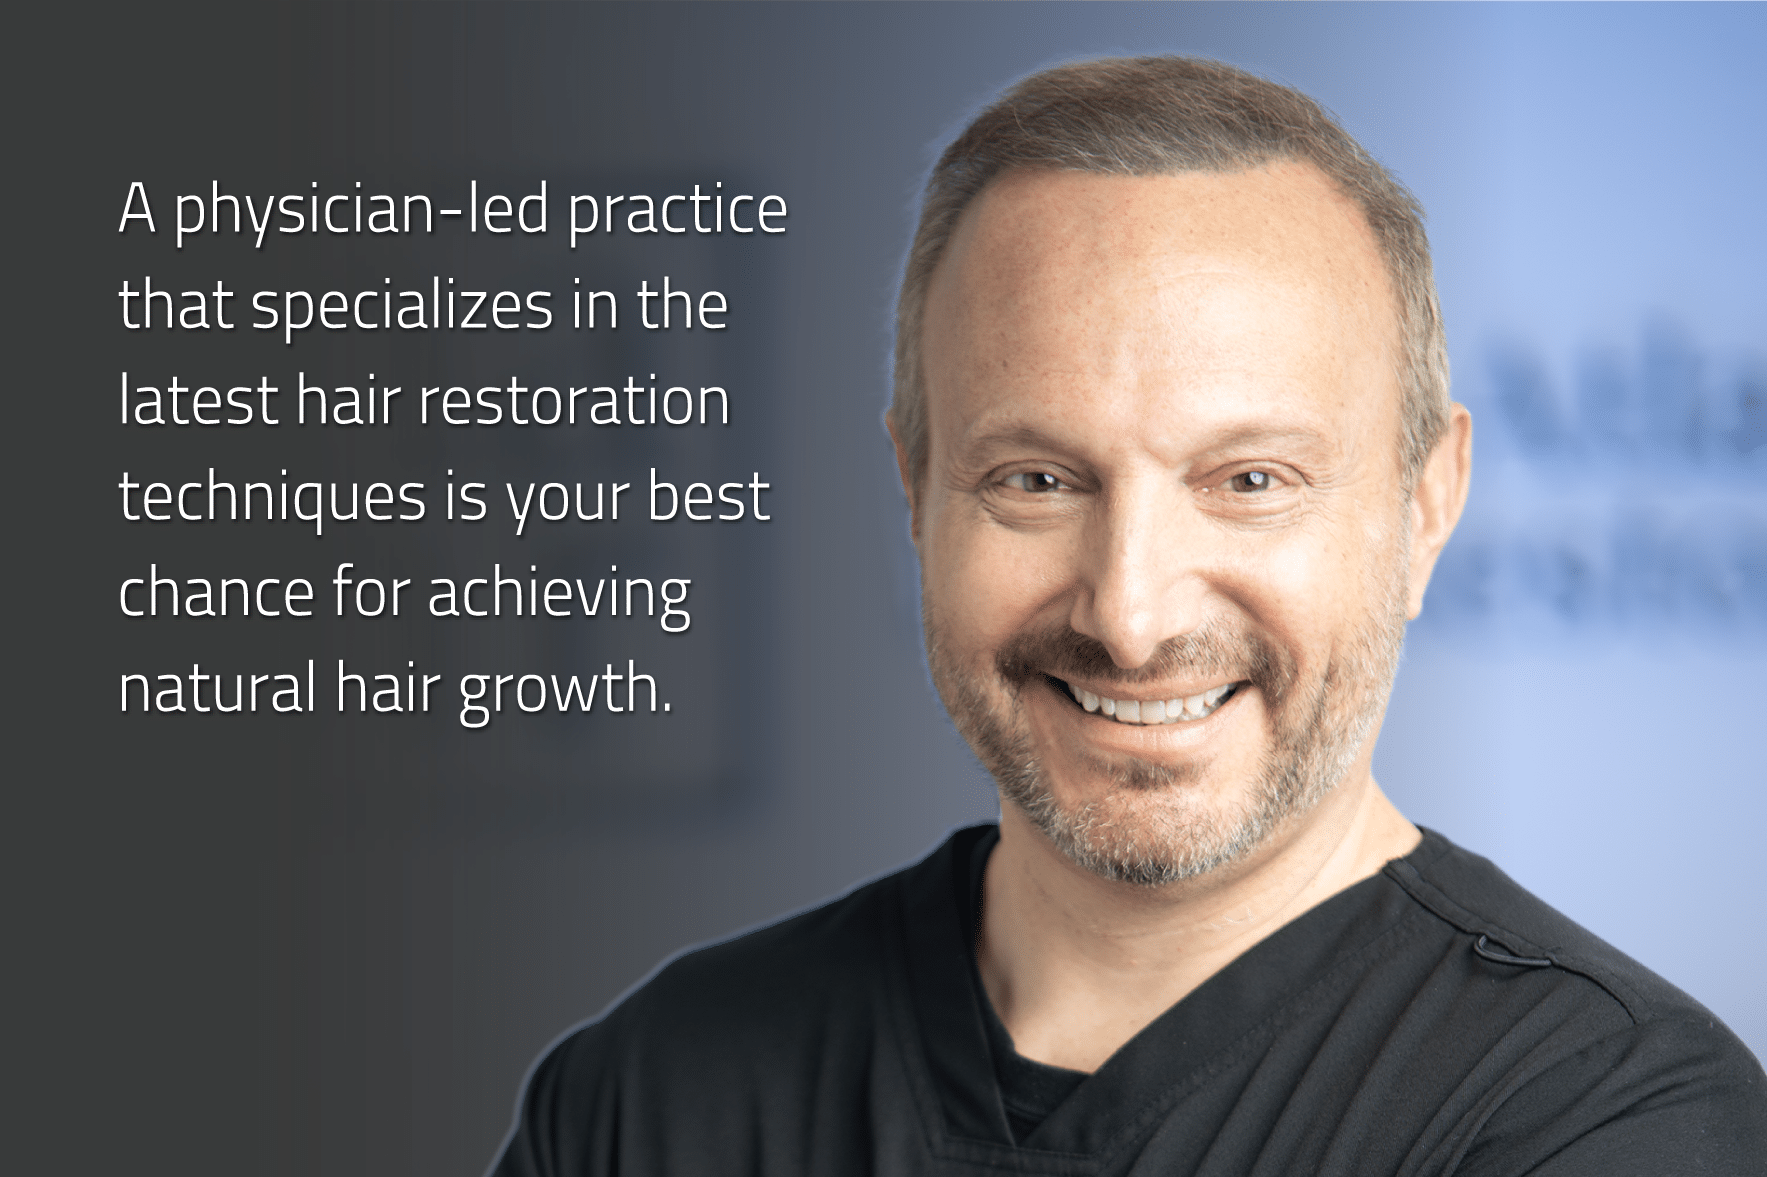 Why is choosing a good hair restoration clinic so important?